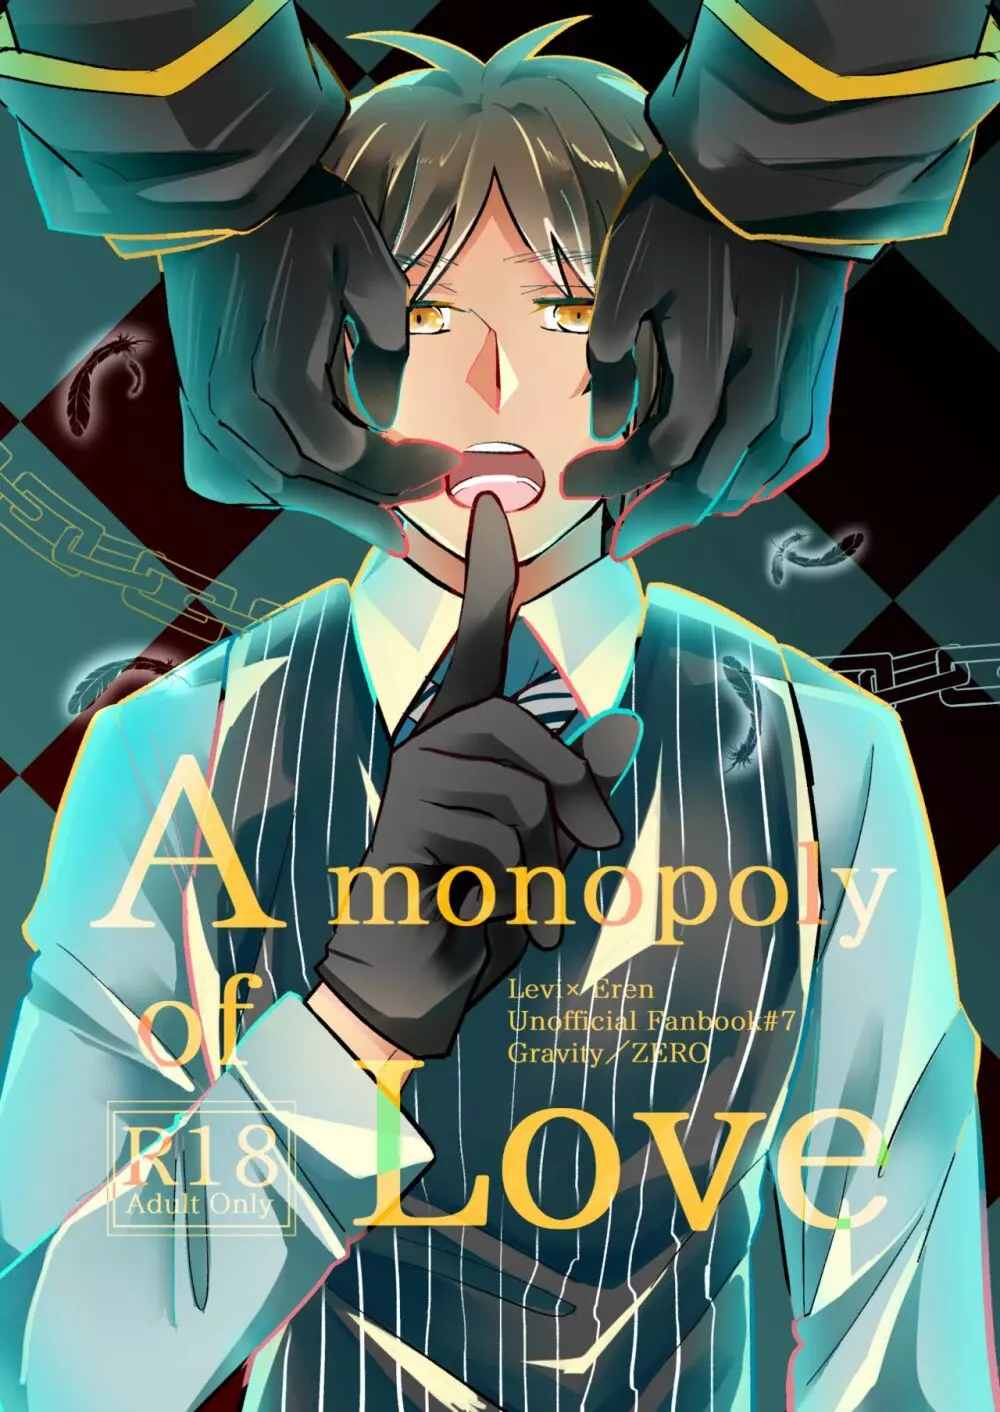 【web再録】A monopoly of Love【リヴァエレ】